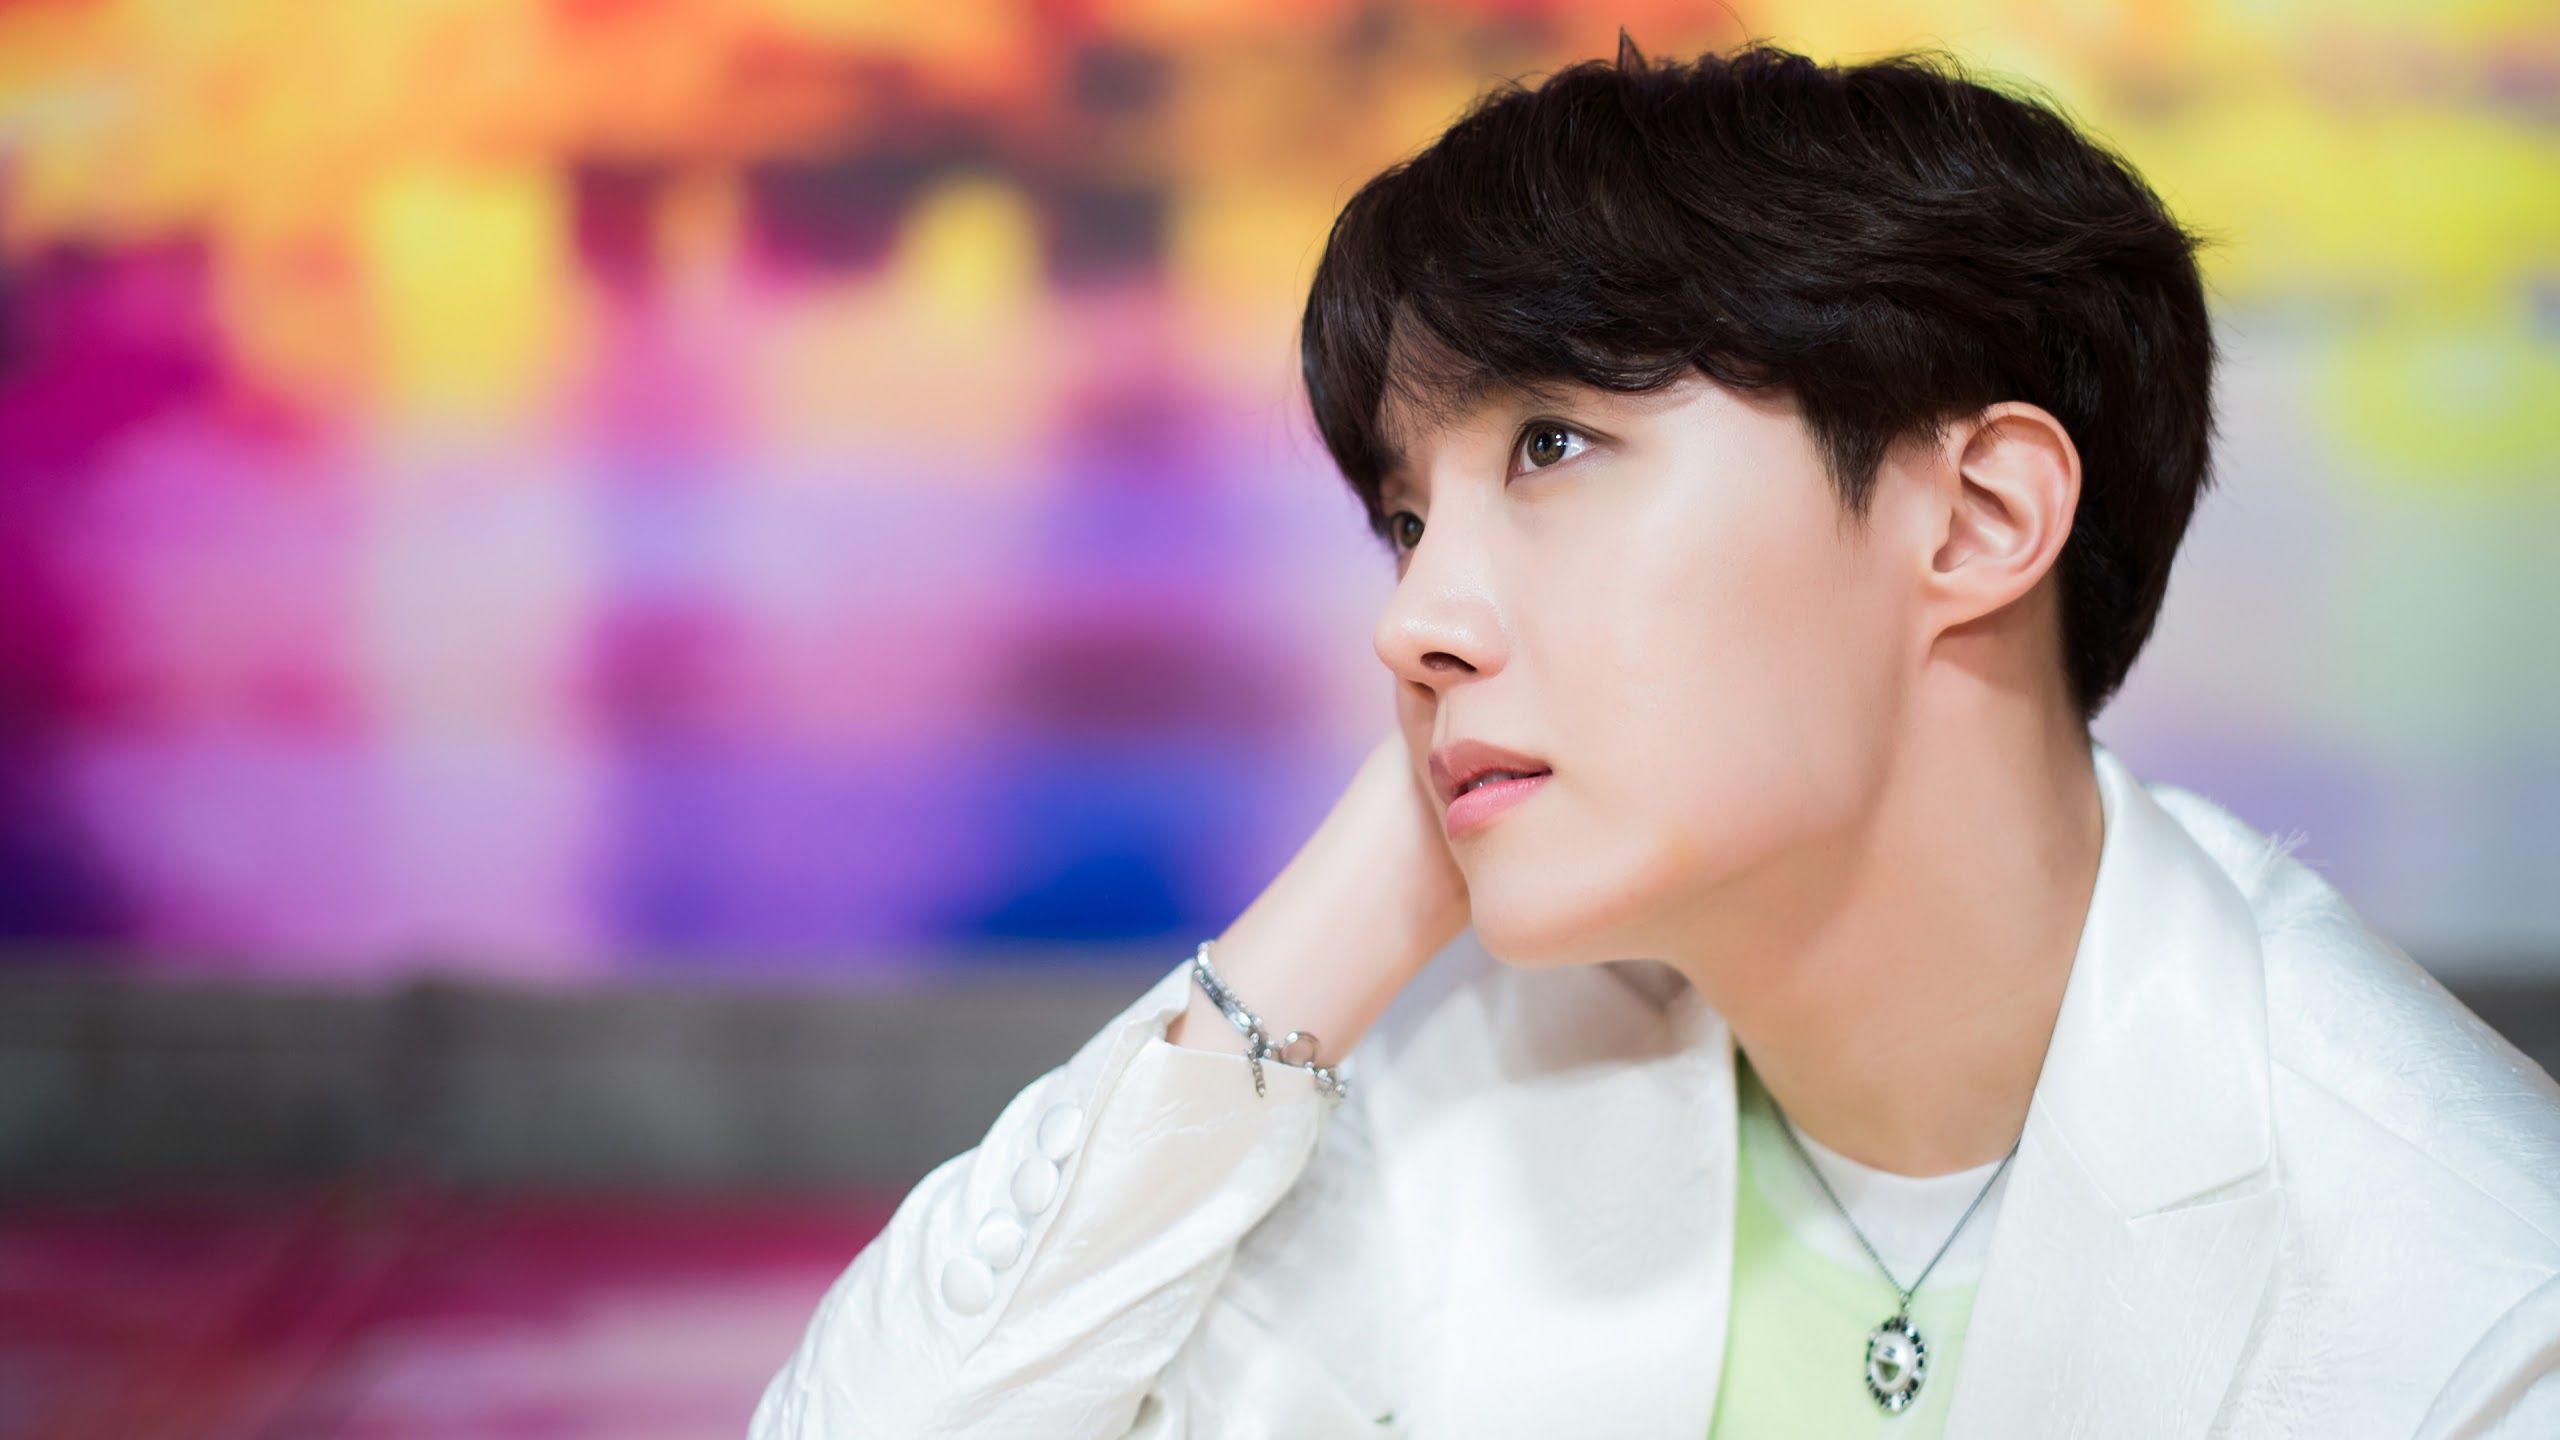 J Hope Wallpapers Hd posted by Zoey Peltier